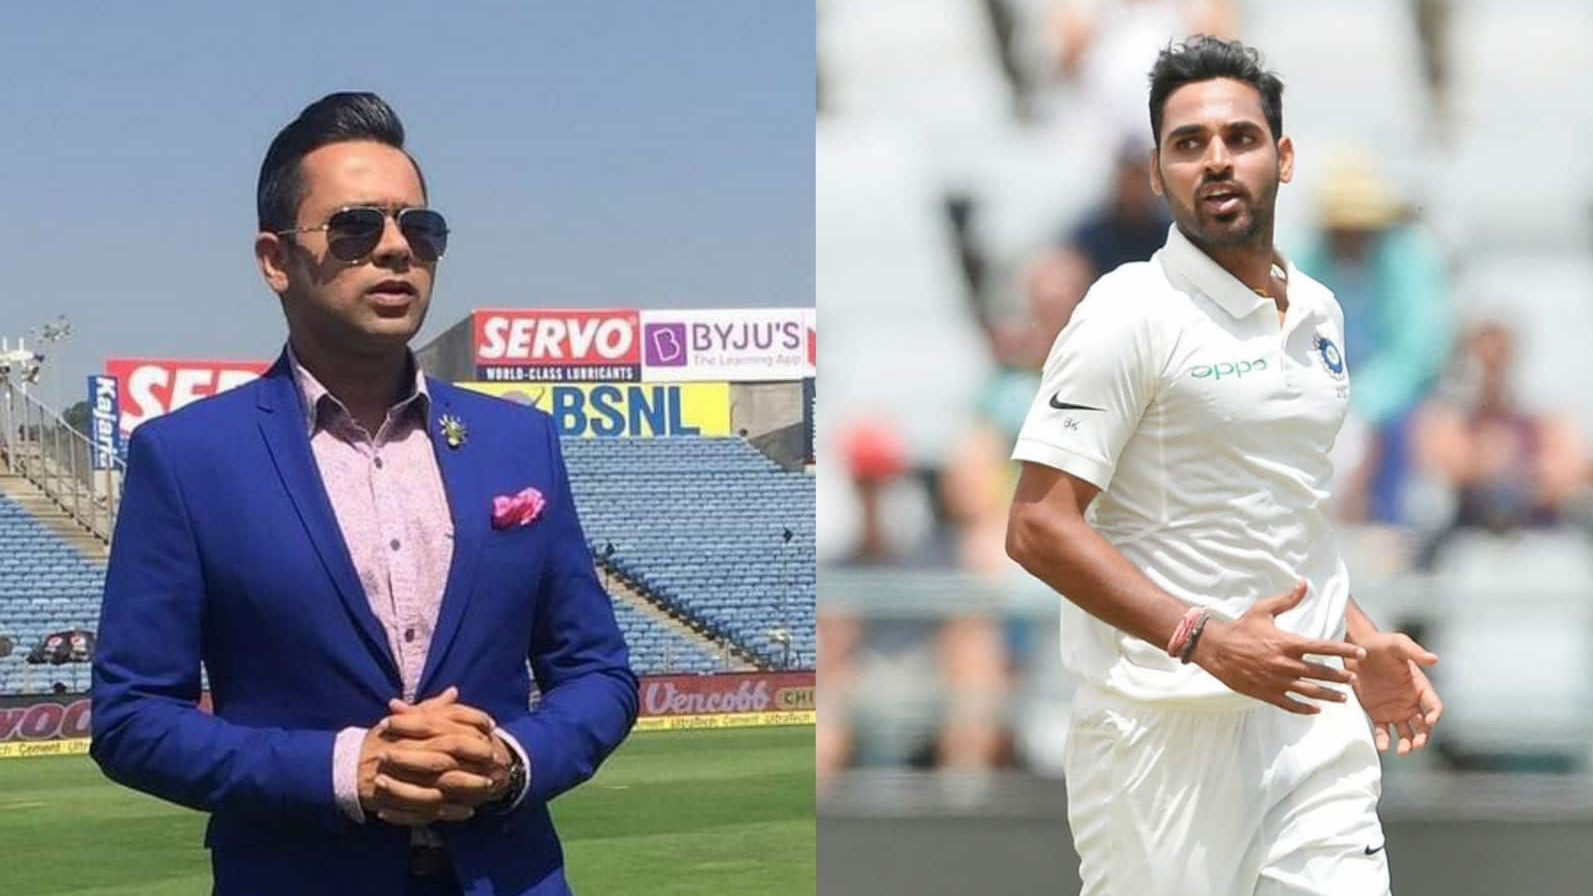 “I will have Bhuvneshwar Kumar in my thoughts for South Africa Tests,” says Aakash Chopra